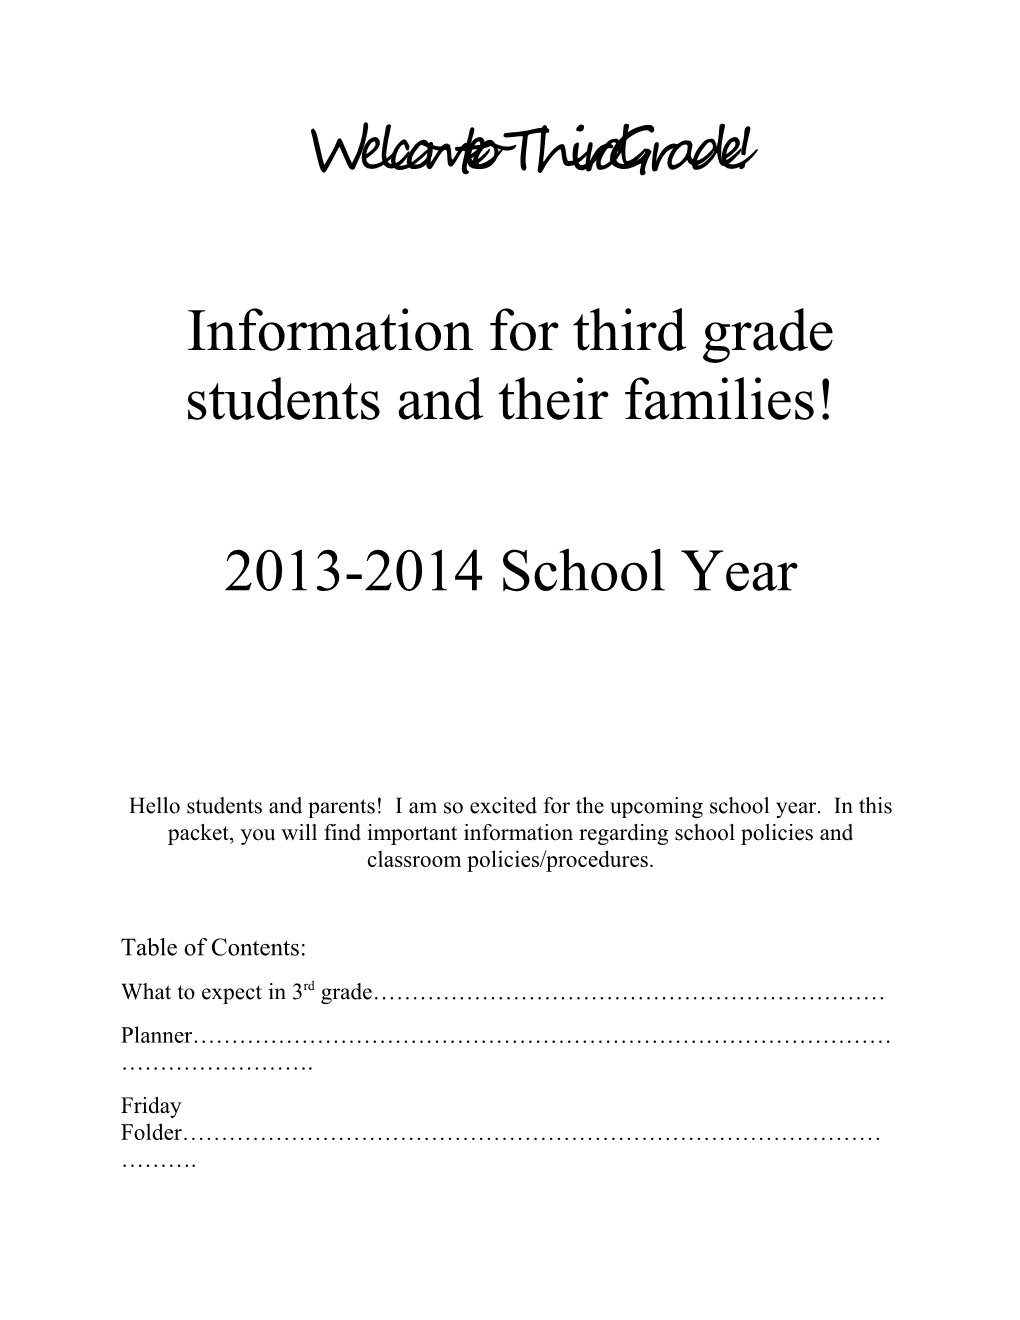 Information for Third Grade Students and Their Families!